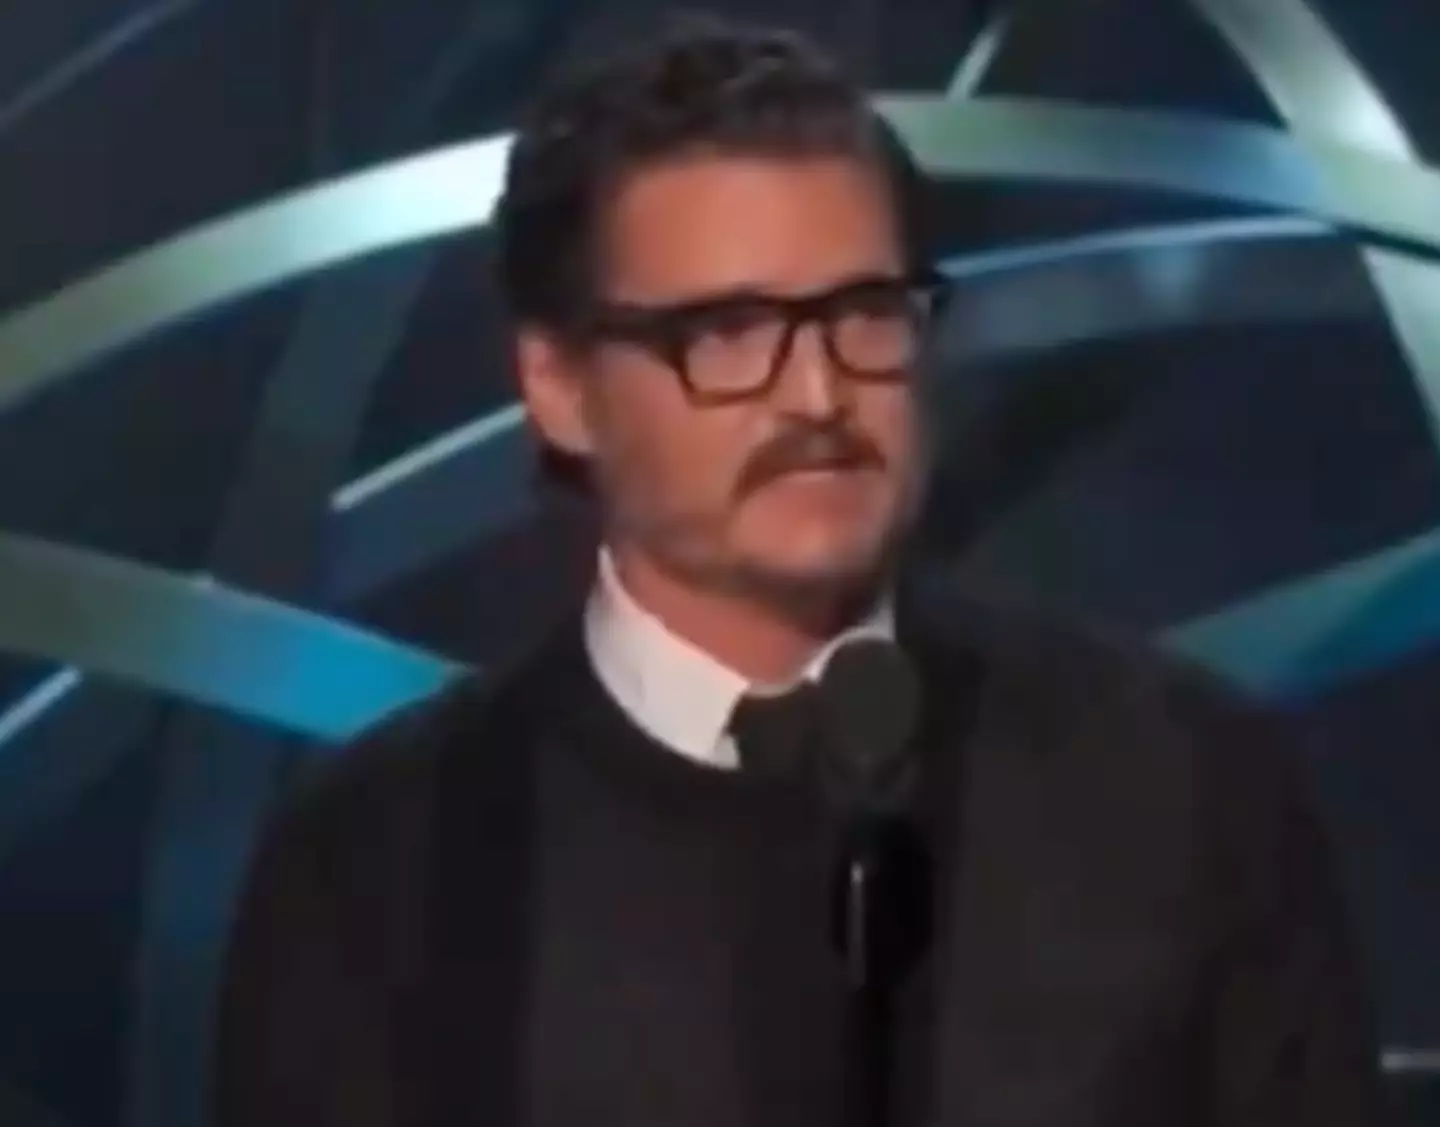 Pedro Pascal's audio was bleeped.